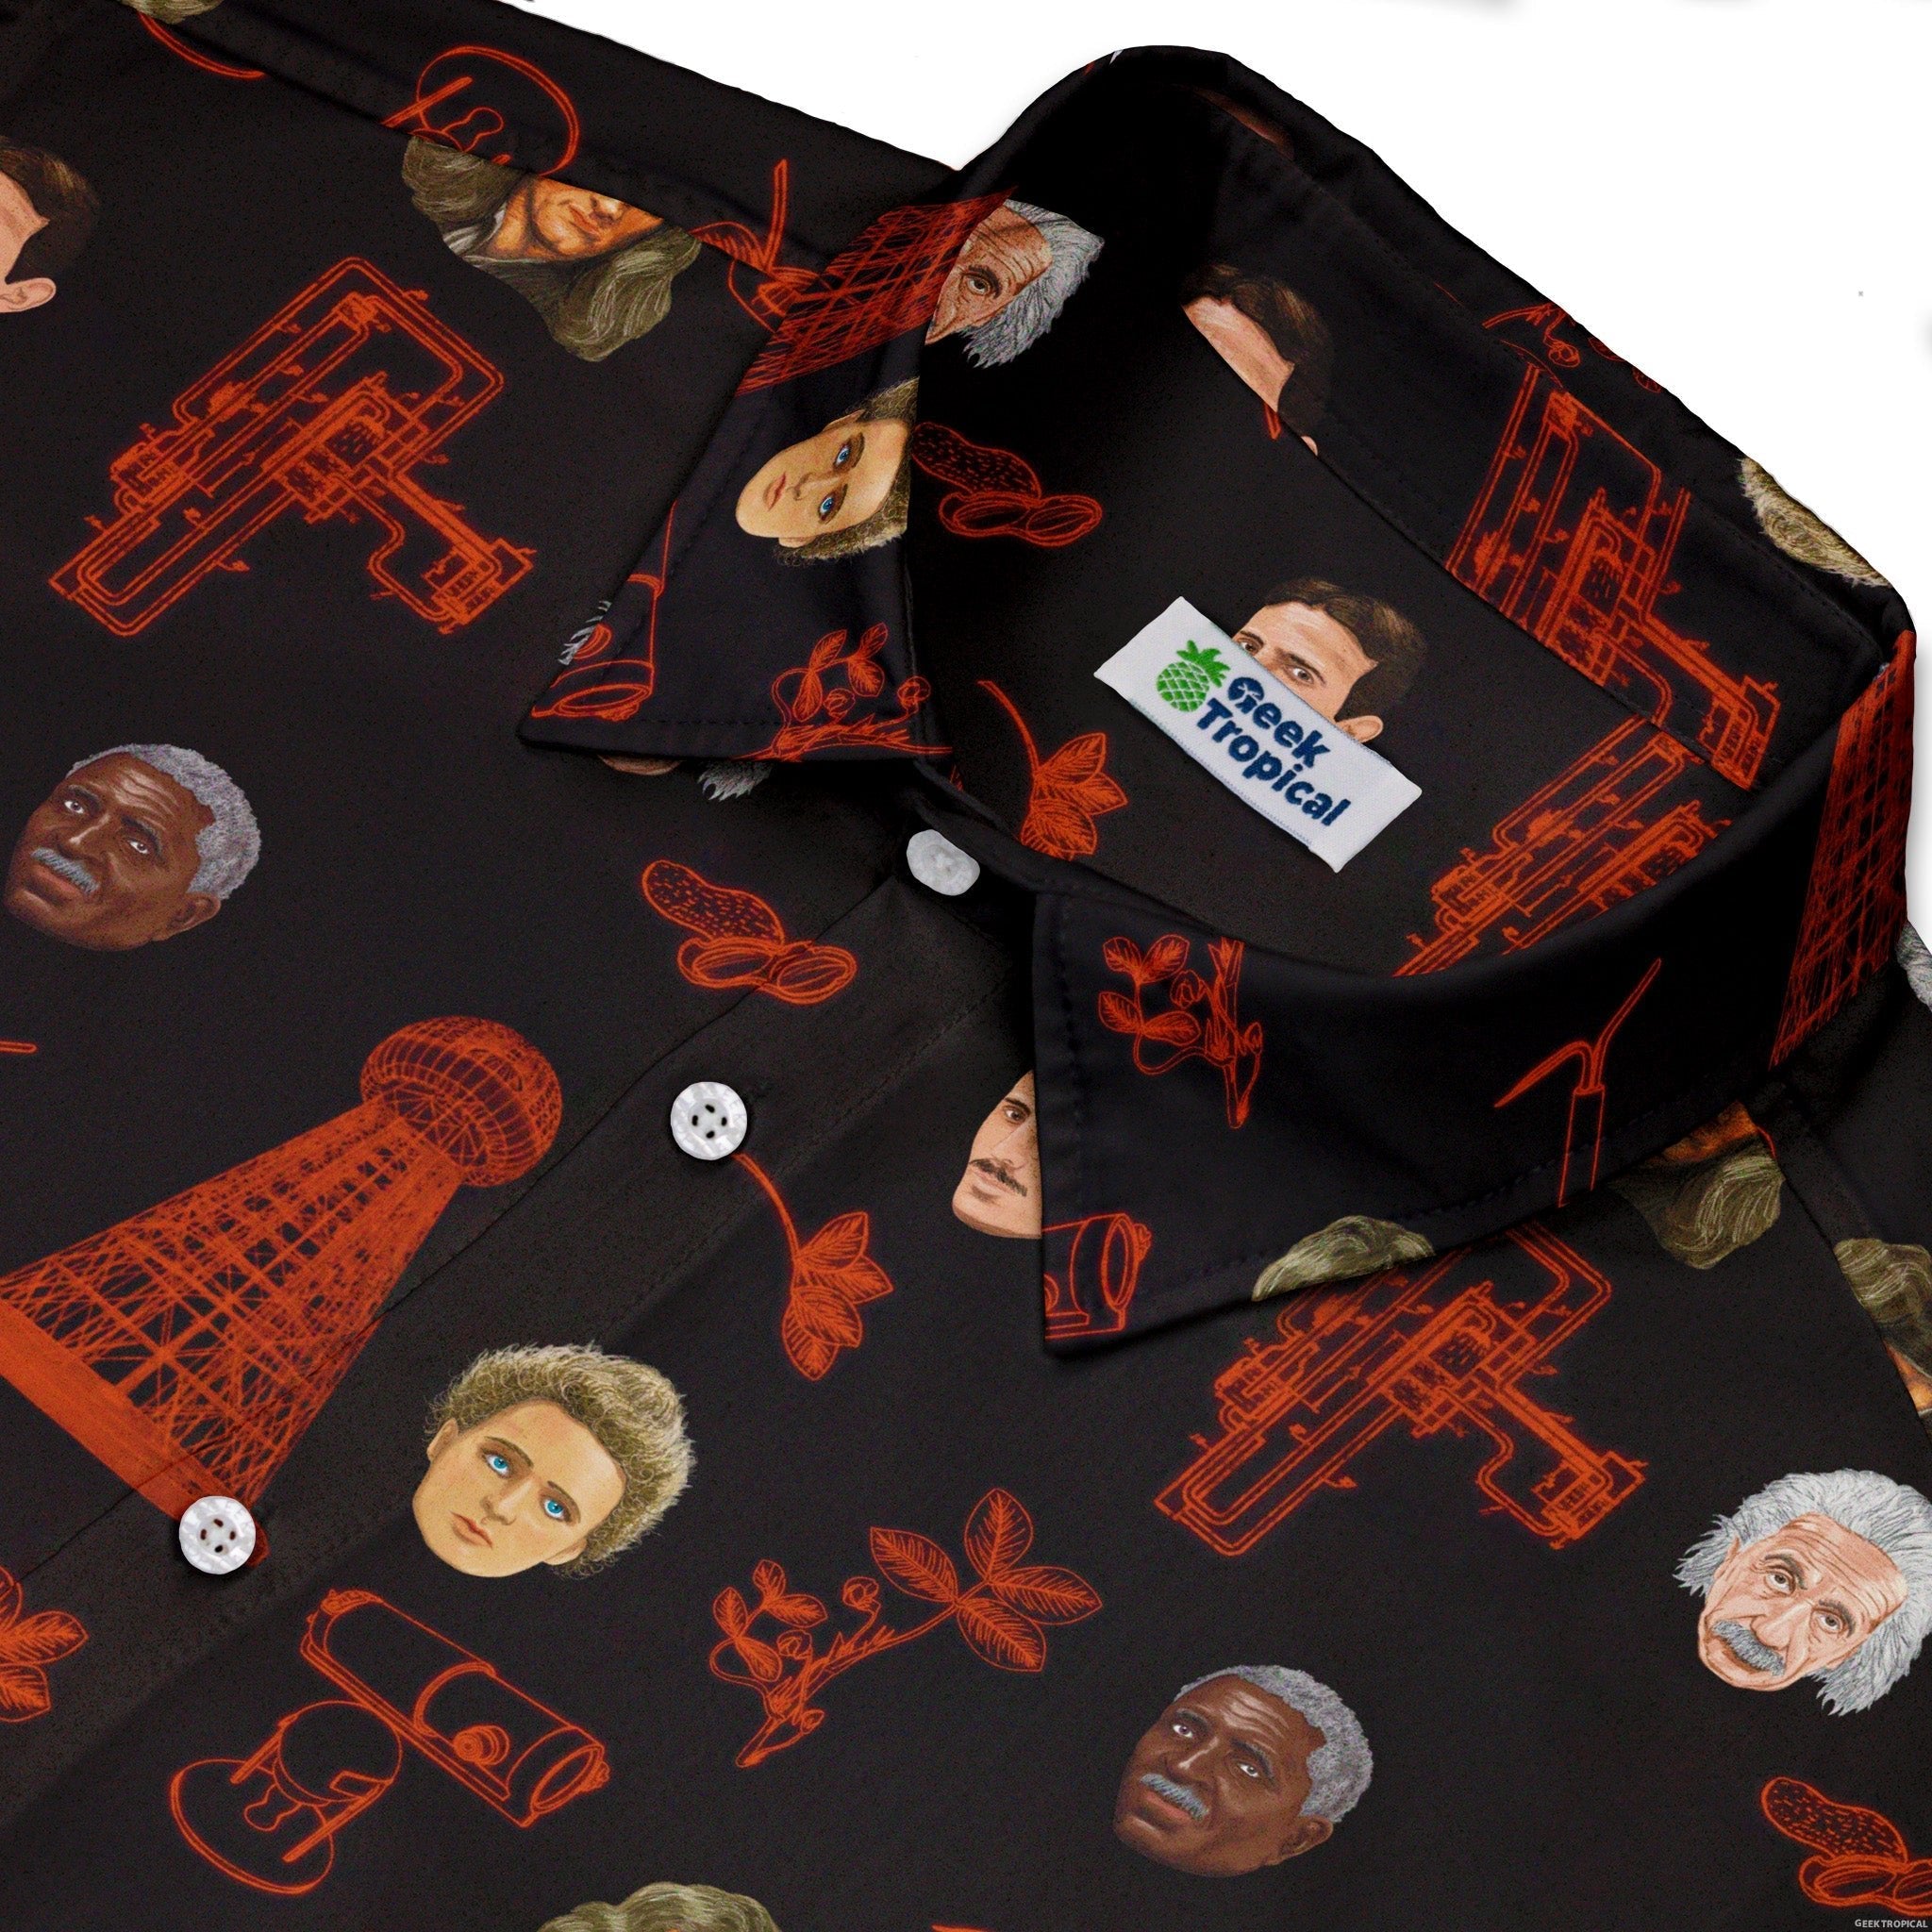 Rusty Science Legends Button Up Shirt - adult sizing - Designs by Nathan - science print